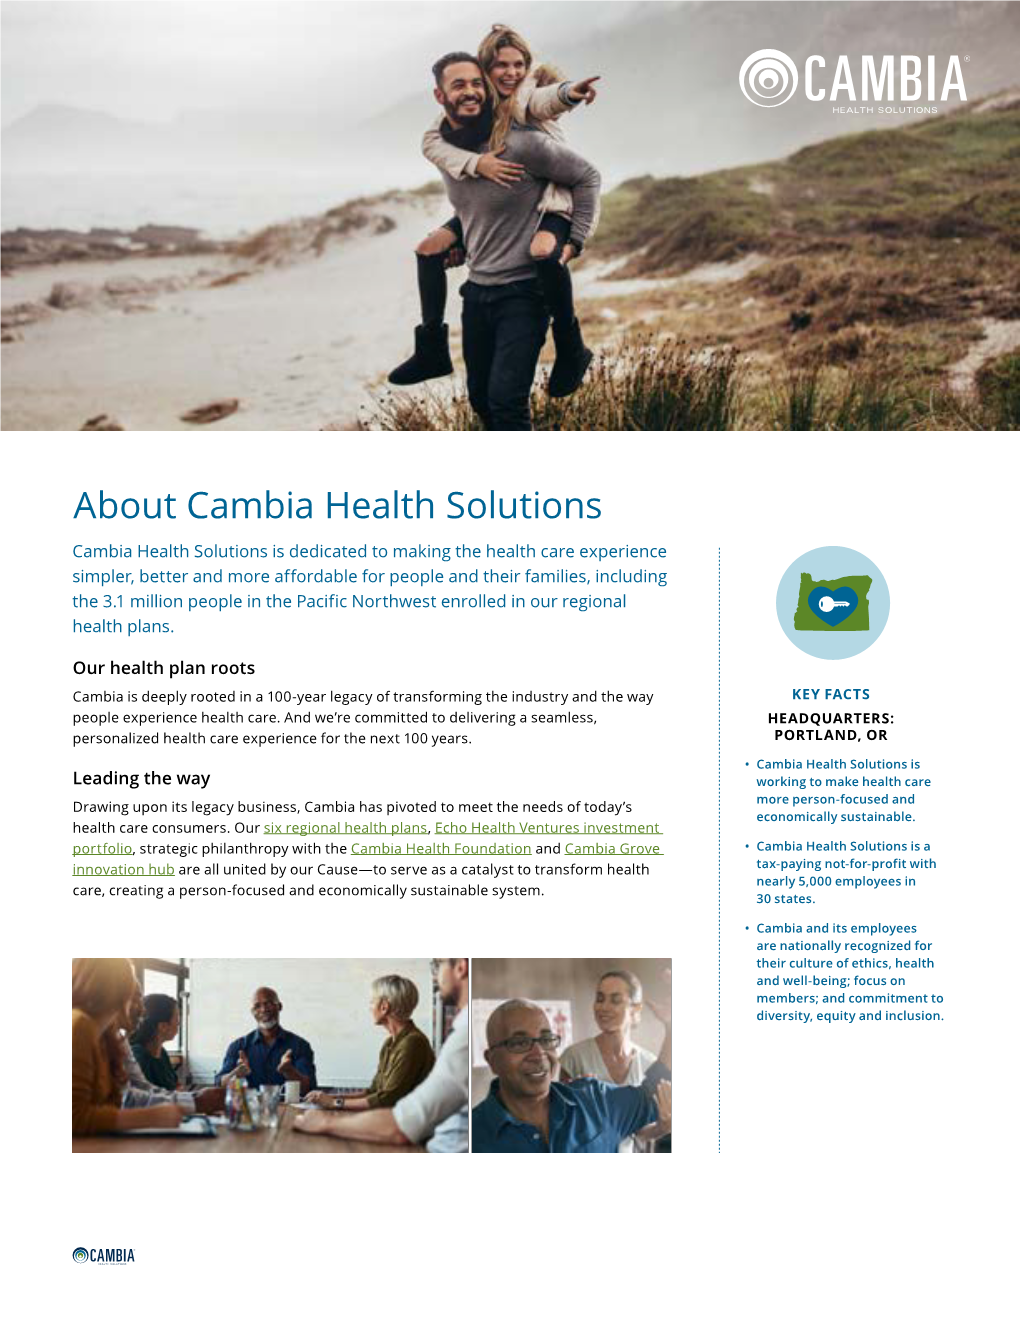 About Cambia Health Solutions